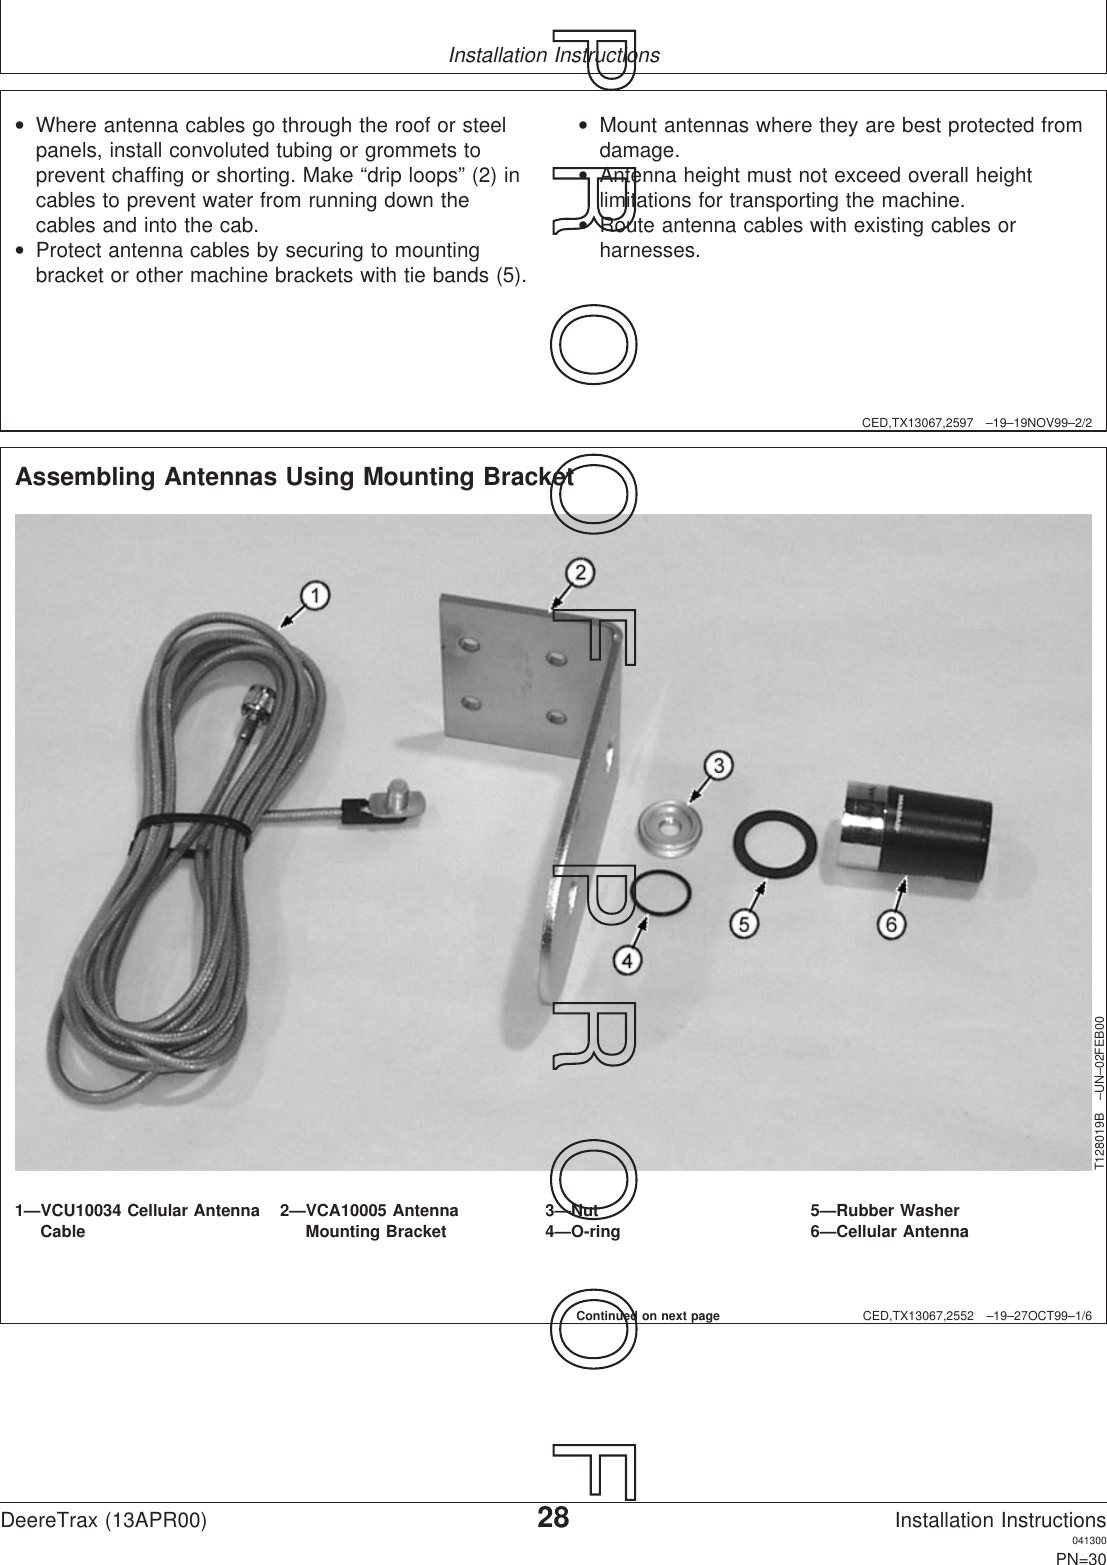 Installation InstructionsCED,TX13067,2597 –19–19NOV99–2/2•Where antenna cables go through the roof or steelpanels, install convoluted tubing or grommets toprevent chaffing or shorting. Make “drip loops” (2) incables to prevent water from running down thecables and into the cab.•Protect antenna cables by securing to mountingbracket or other machine brackets with tie bands (5).•Mount antennas where they are best protected fromdamage.•Antenna height must not exceed overall heightlimitations for transporting the machine.•Route antenna cables with existing cables orharnesses.CED,TX13067,2552 –19–27OCT99–1/6Assembling Antennas Using Mounting BracketT128019B –UN–02FEB001—VCU10034 Cellular Antenna 2—VCA10005 Antenna 3—Nut 5—Rubber WasherCable Mounting Bracket 4—O-ring 6—Cellular AntennaContinued on next pageDeereTrax (13APR00)28Installation Instructions041300PN=30P  R  O  O  F      P  R  O  O  F